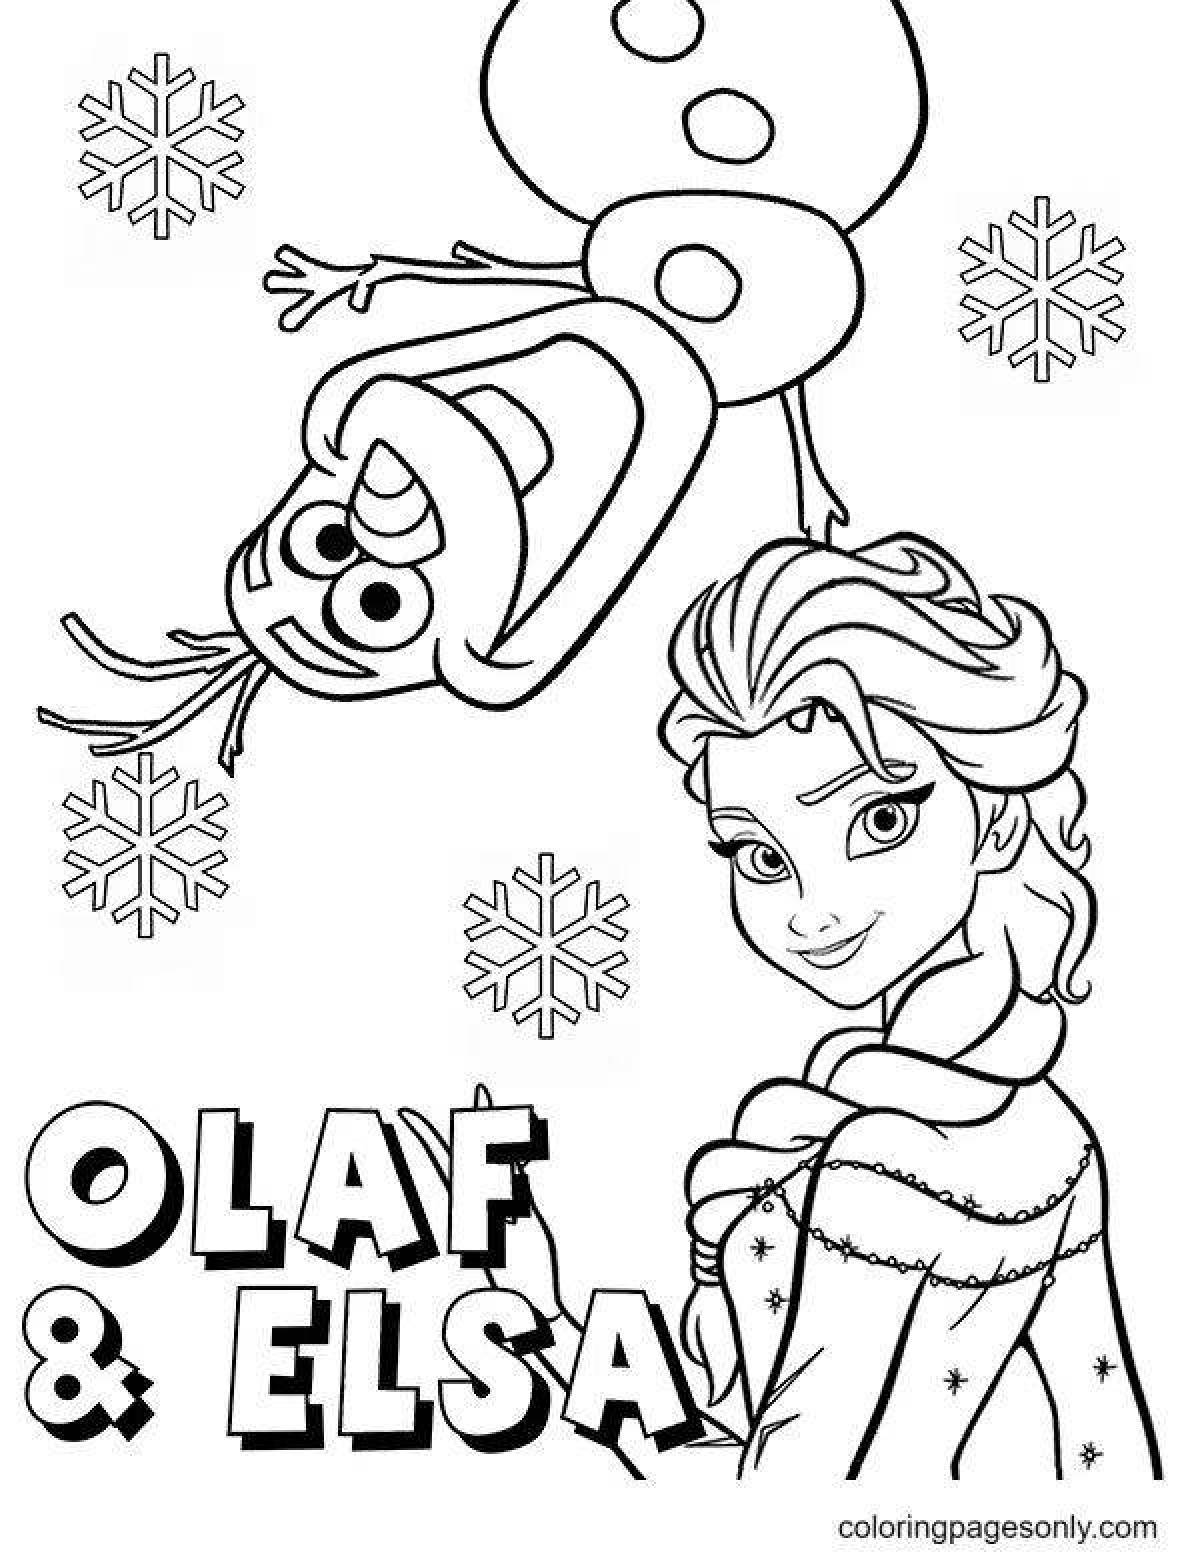 Lovely coloring anna olaf and elsa